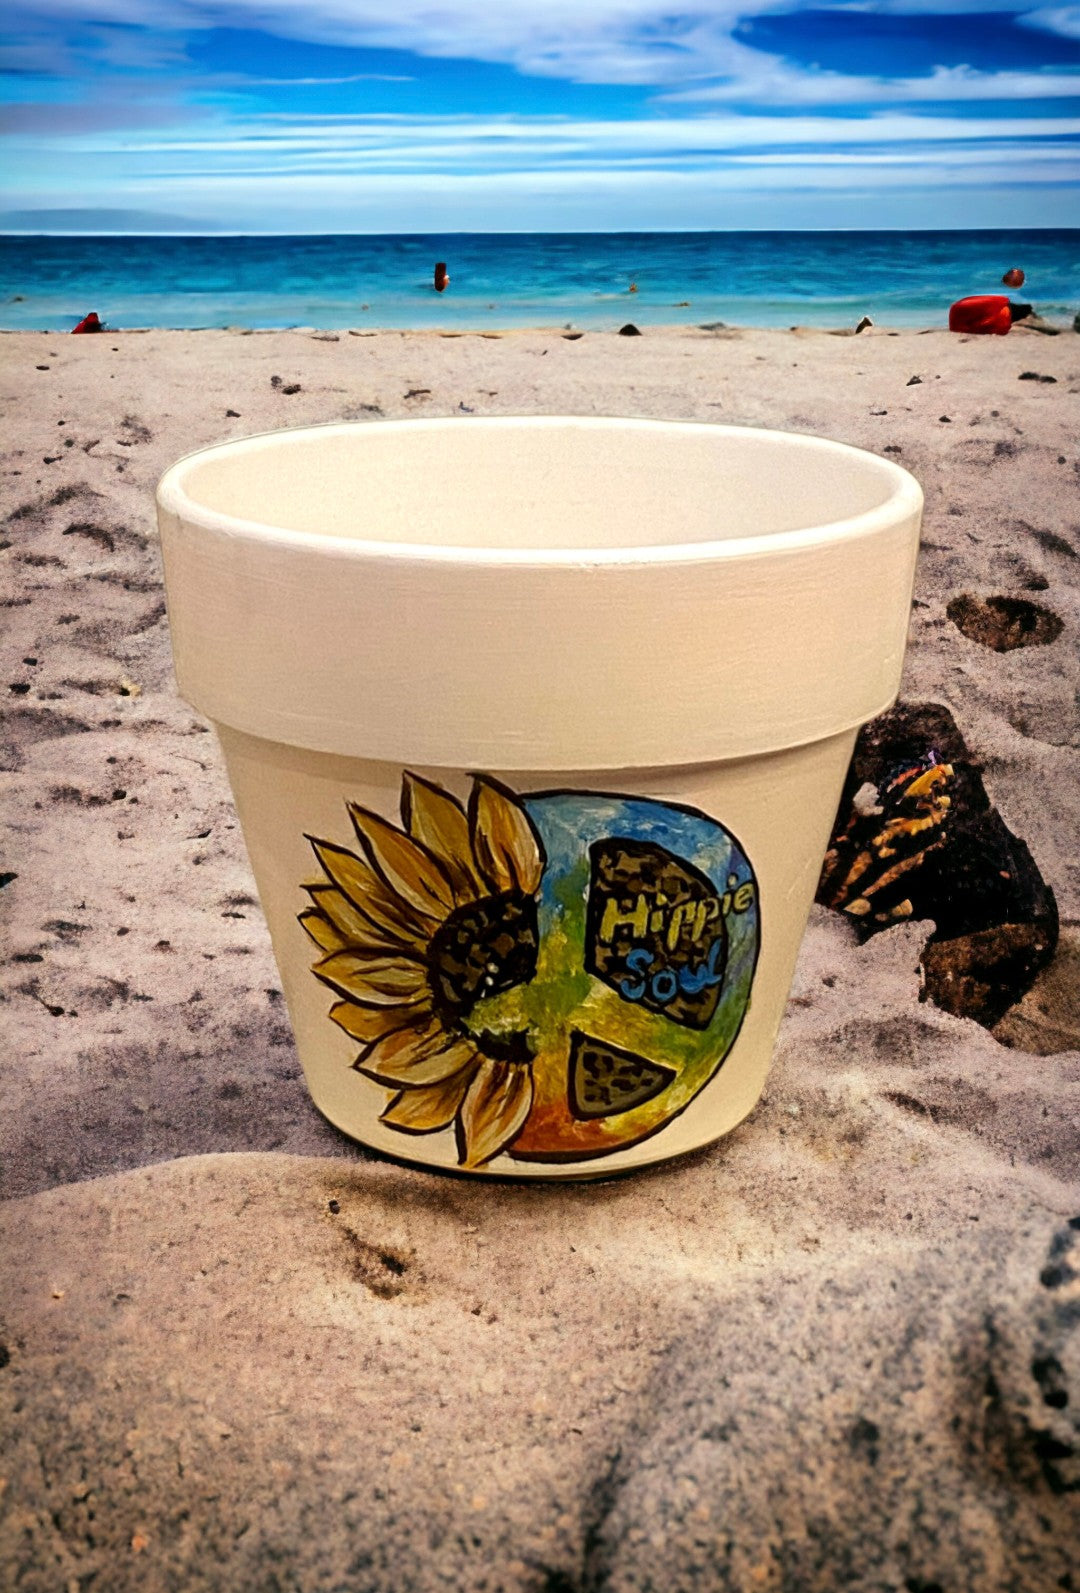 Emerald Blossoms - &quot;Hippie Soul&quot; sunflowers combined with the hippie&#39;s peace symbol and rainbow background on hand-painted terracotta pots